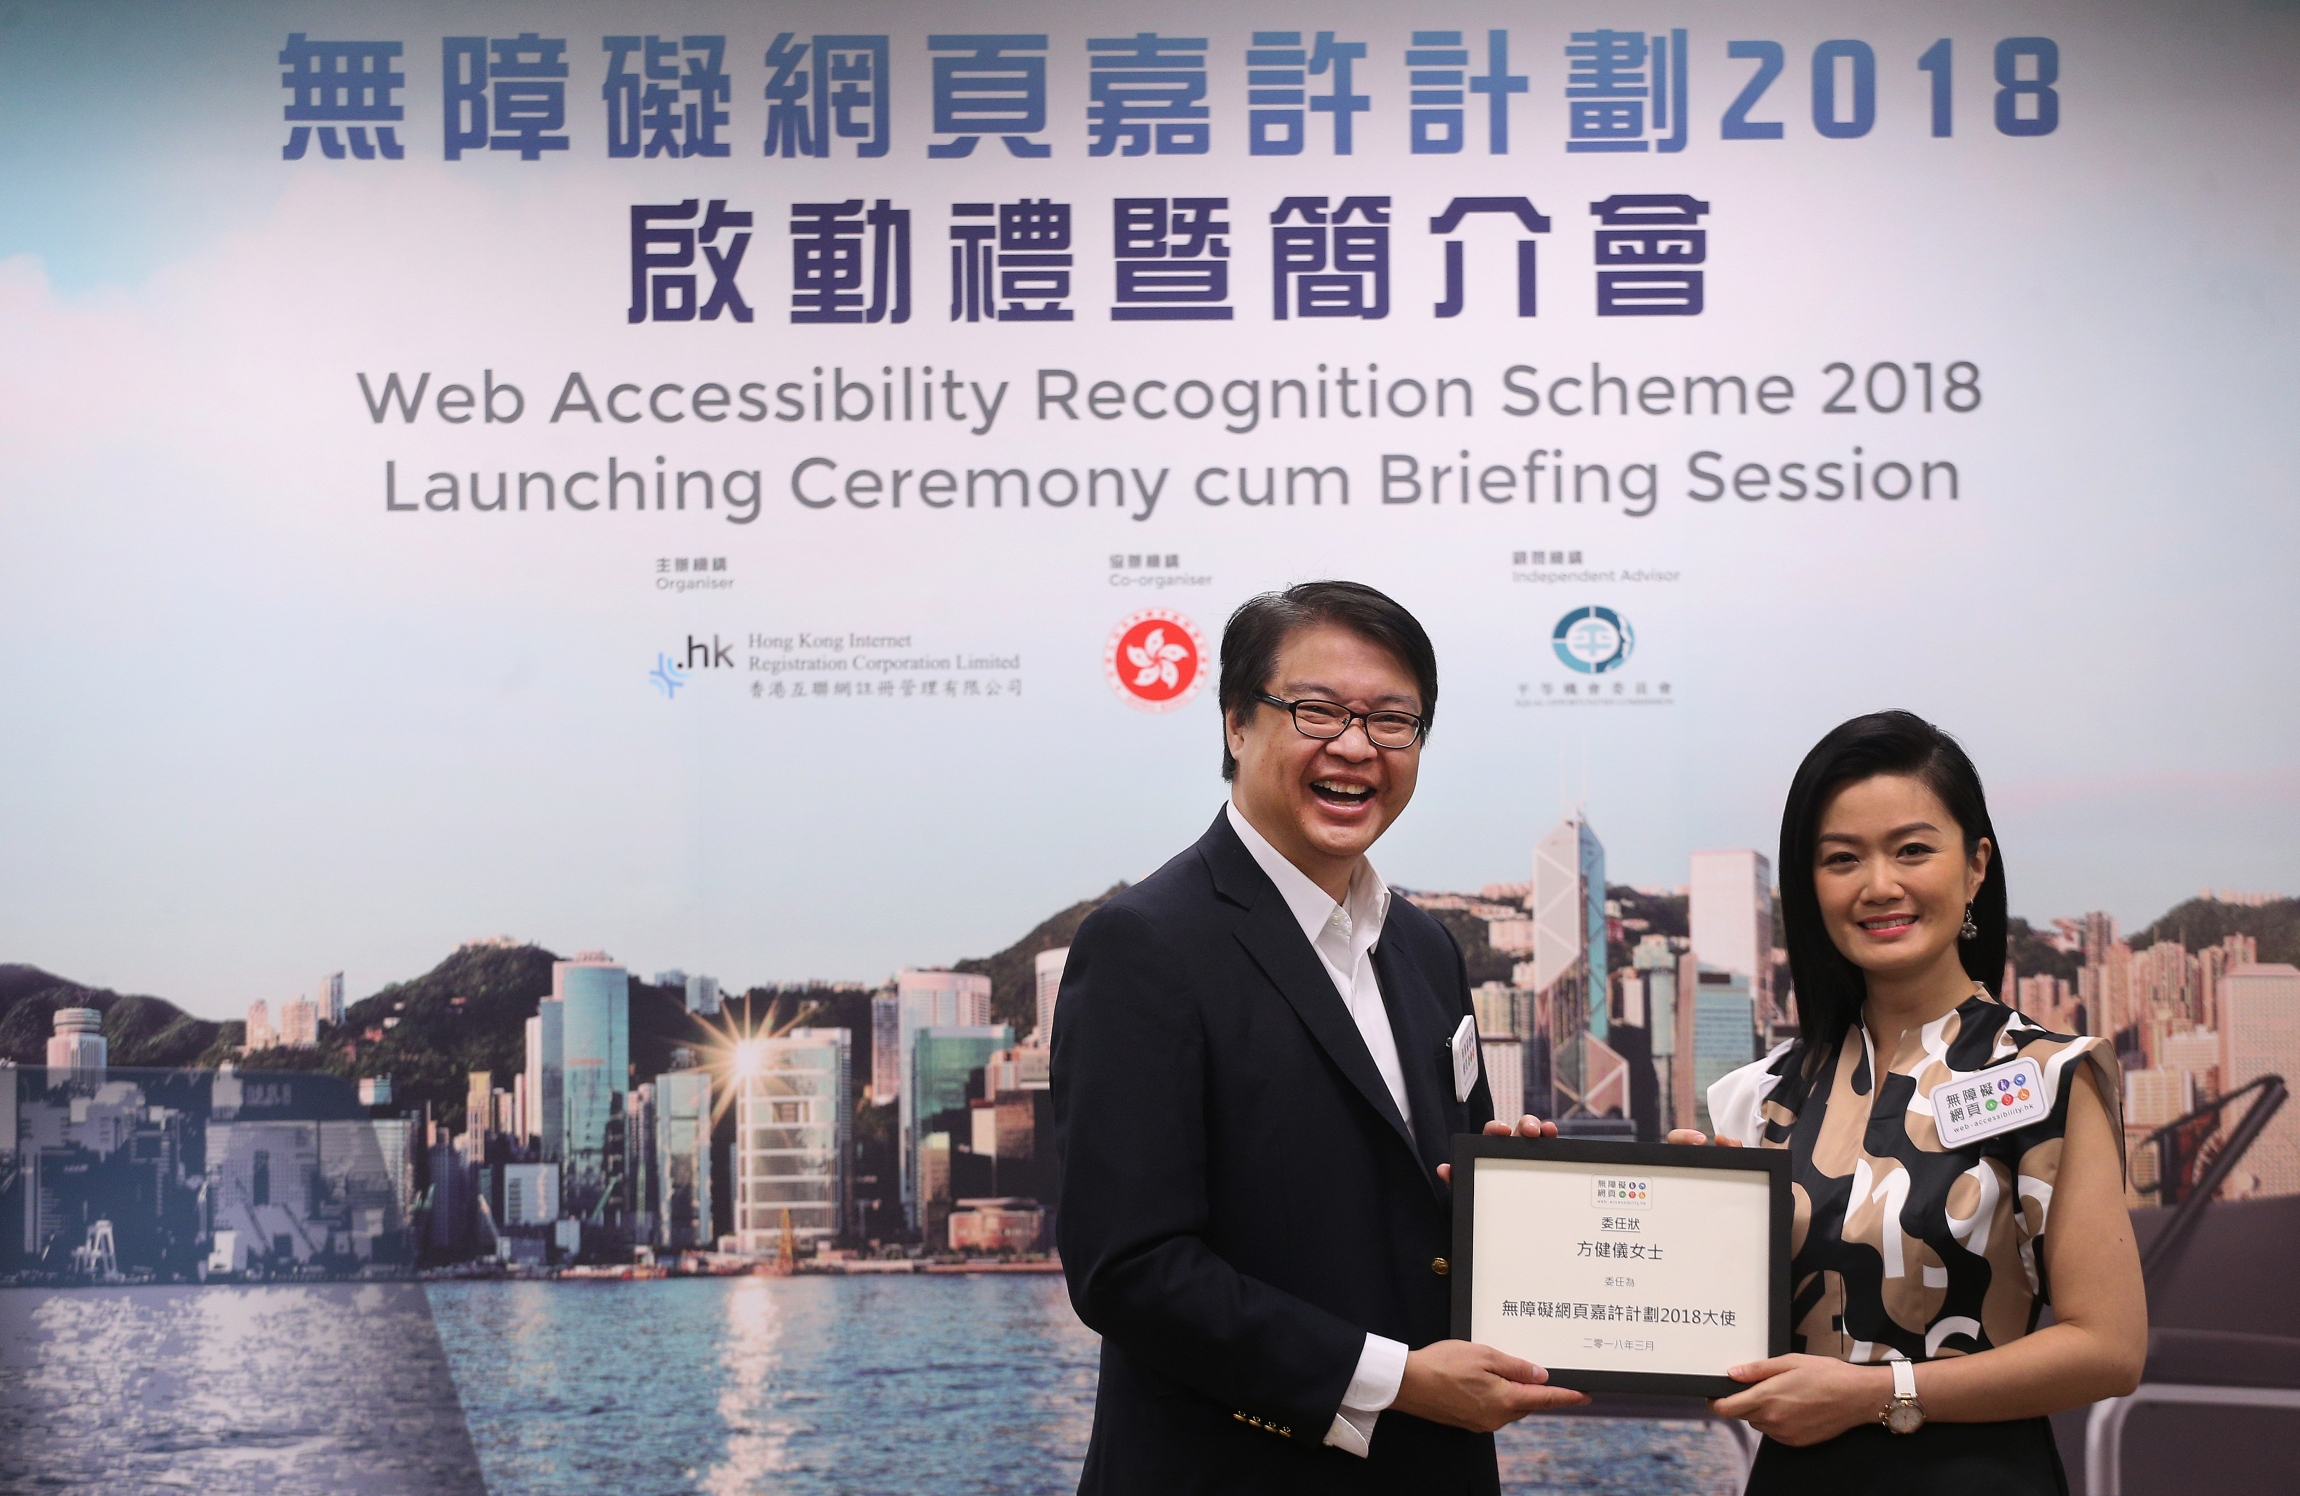 (Press Release) “Web Accessibility Recognition Scheme 2018” Opens for Application introducing Brand-New Recognition Logo and Award Category Promoting Digital Inclusiveness for a Caring Society